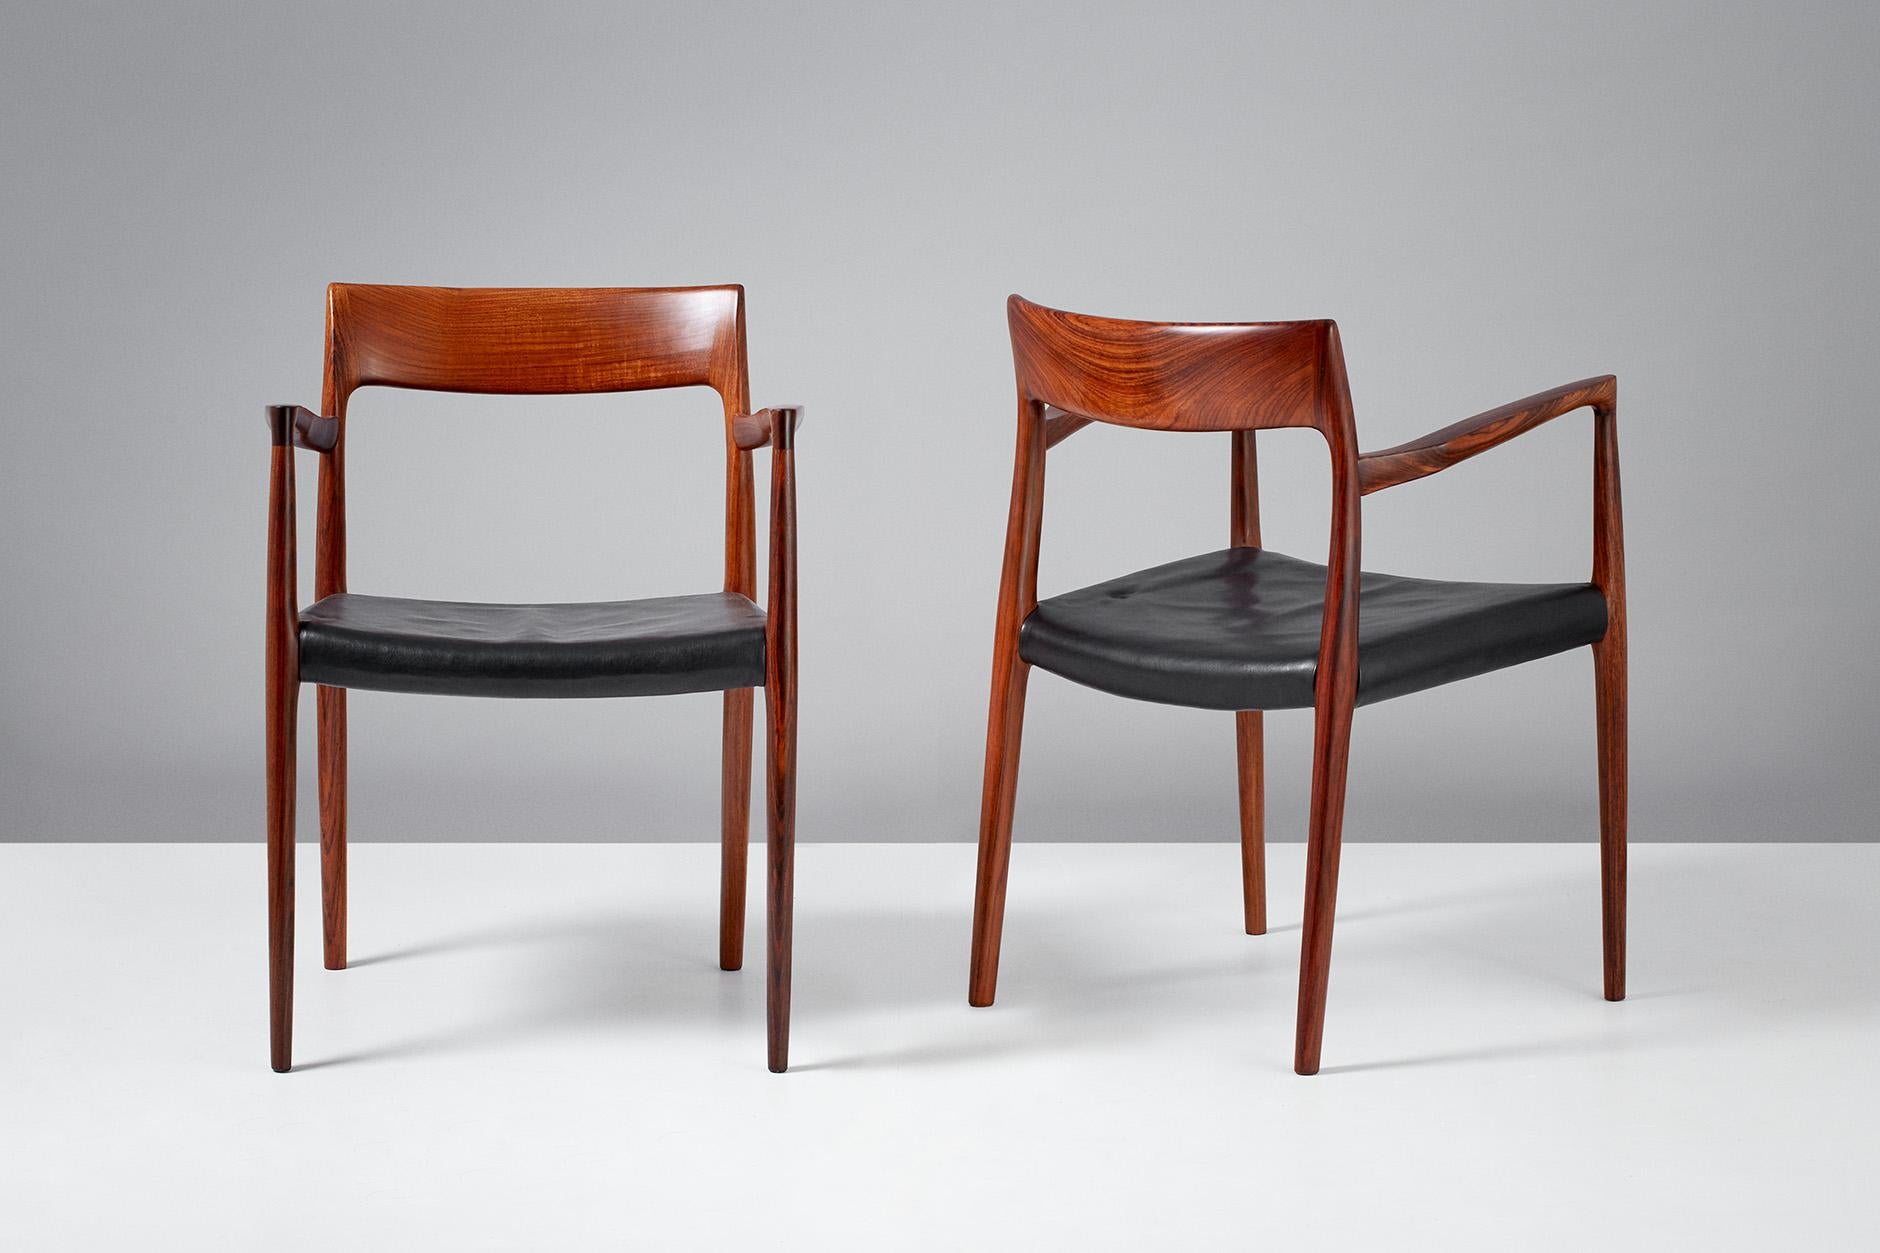 Niels O. Moller

Model 57 chairs, 1959.

Solid rosewood armchairs produced by J.L. Moller Mobelfabrik, Denmark, 1959. Original, patinated black leather seats.

Measures: H 77 cm / D 50 cm / W 55 cm / SH 44 cm.